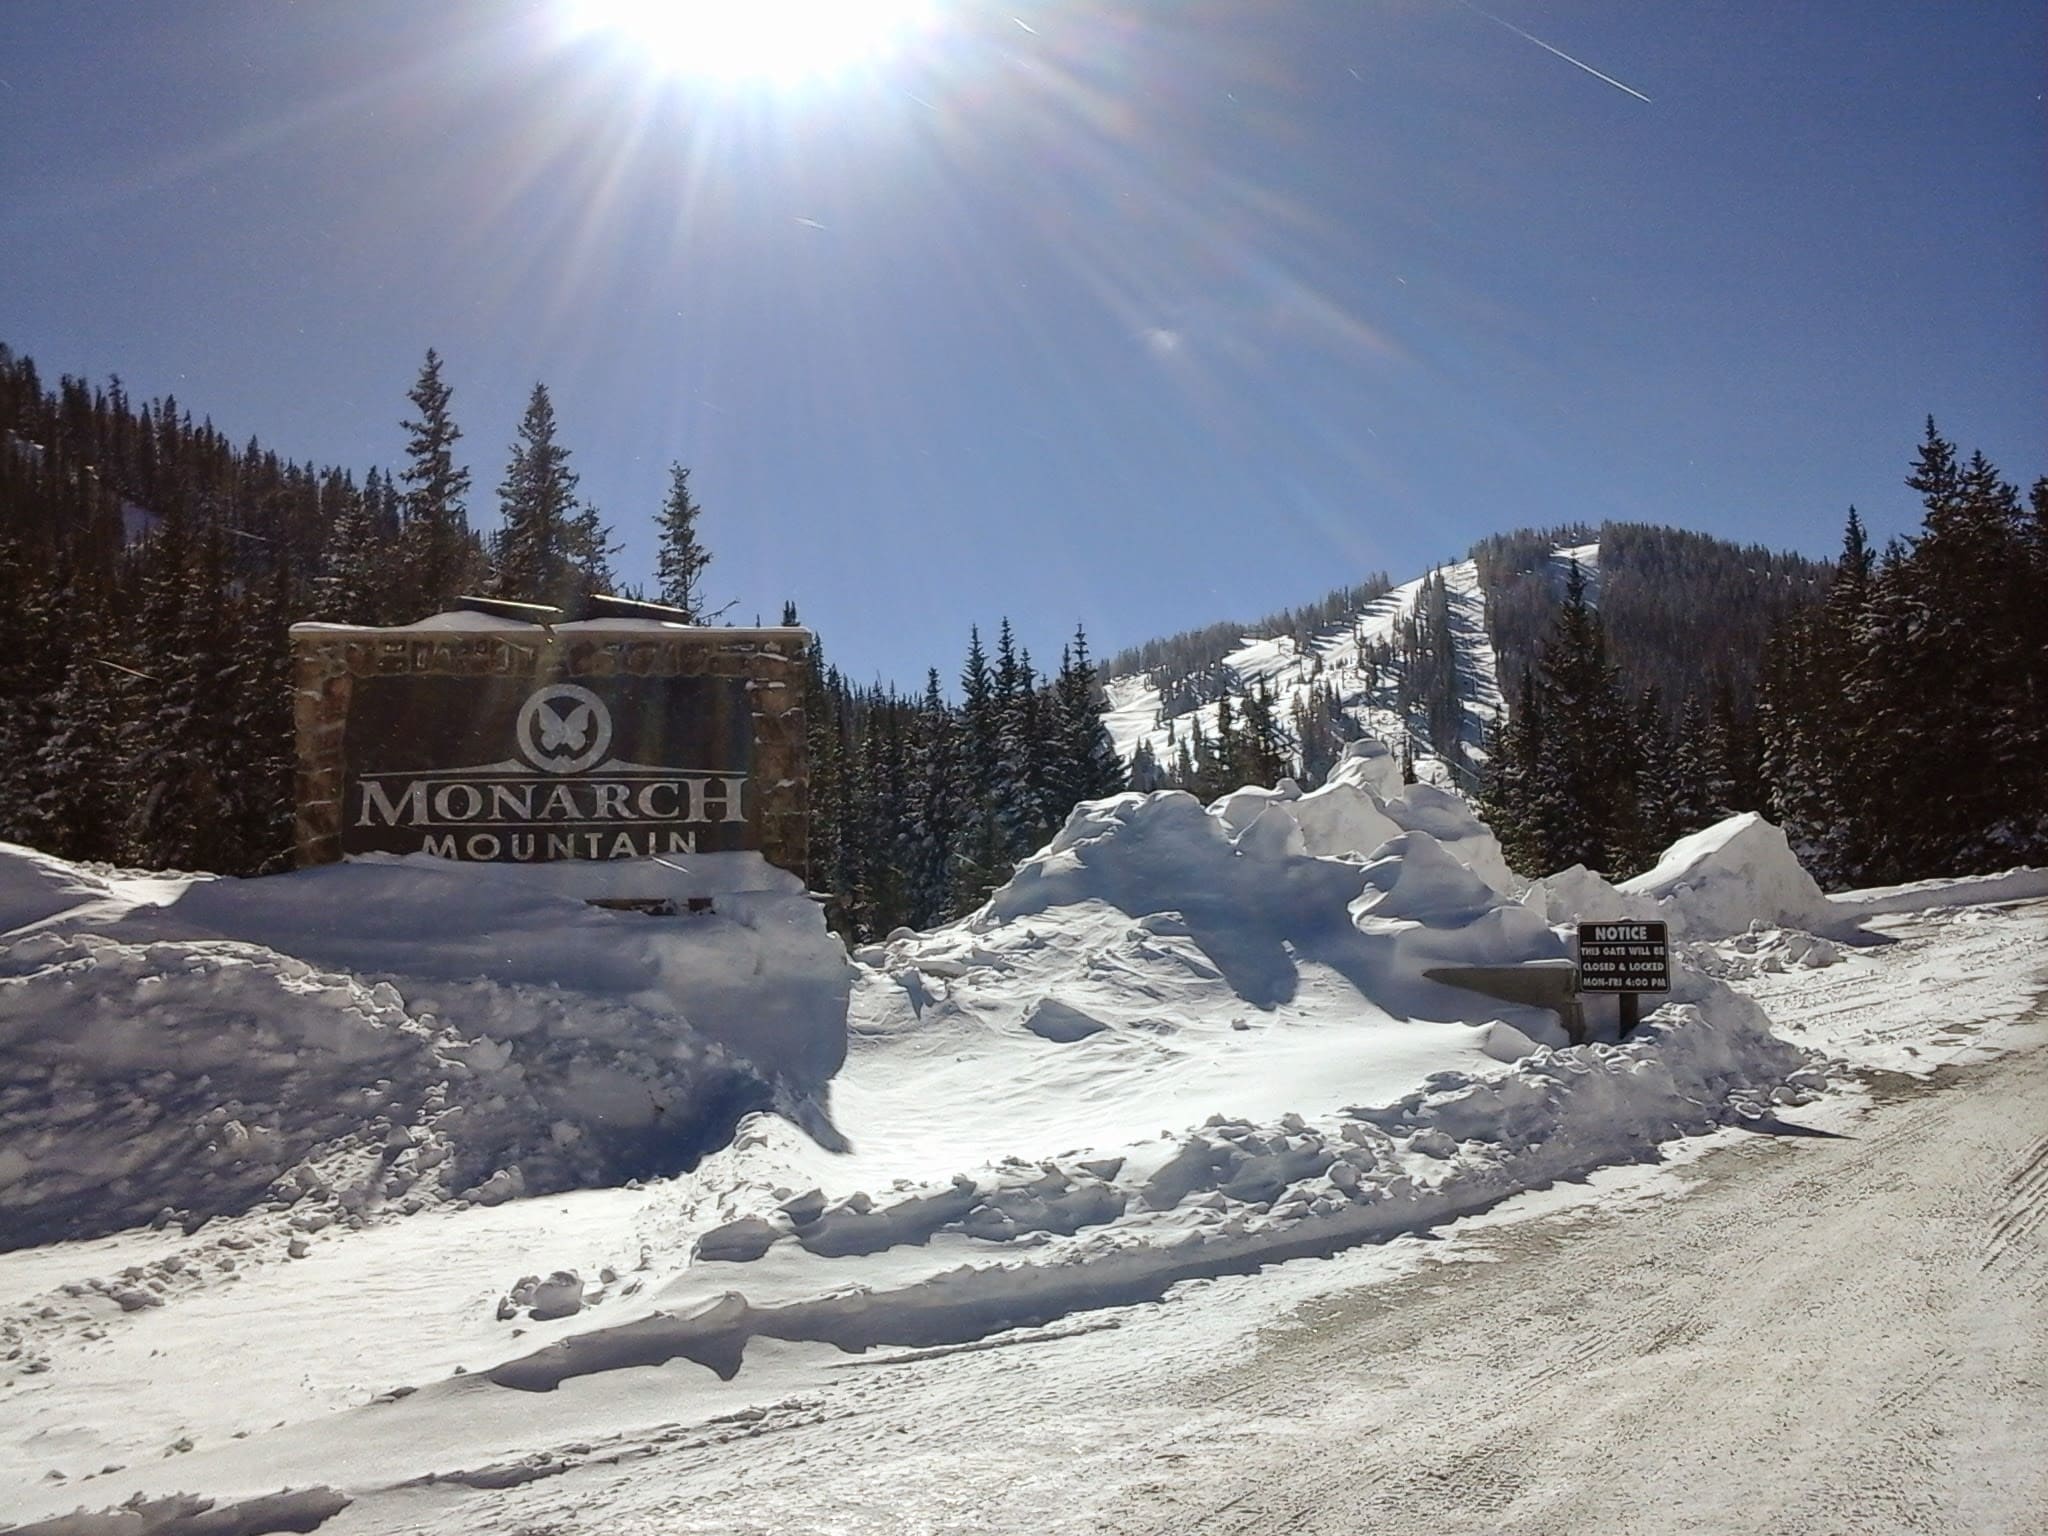 Winter sunny day with lots of snow at the entrance of Monarch Mountain. Looking at the ski slopes in the distance.